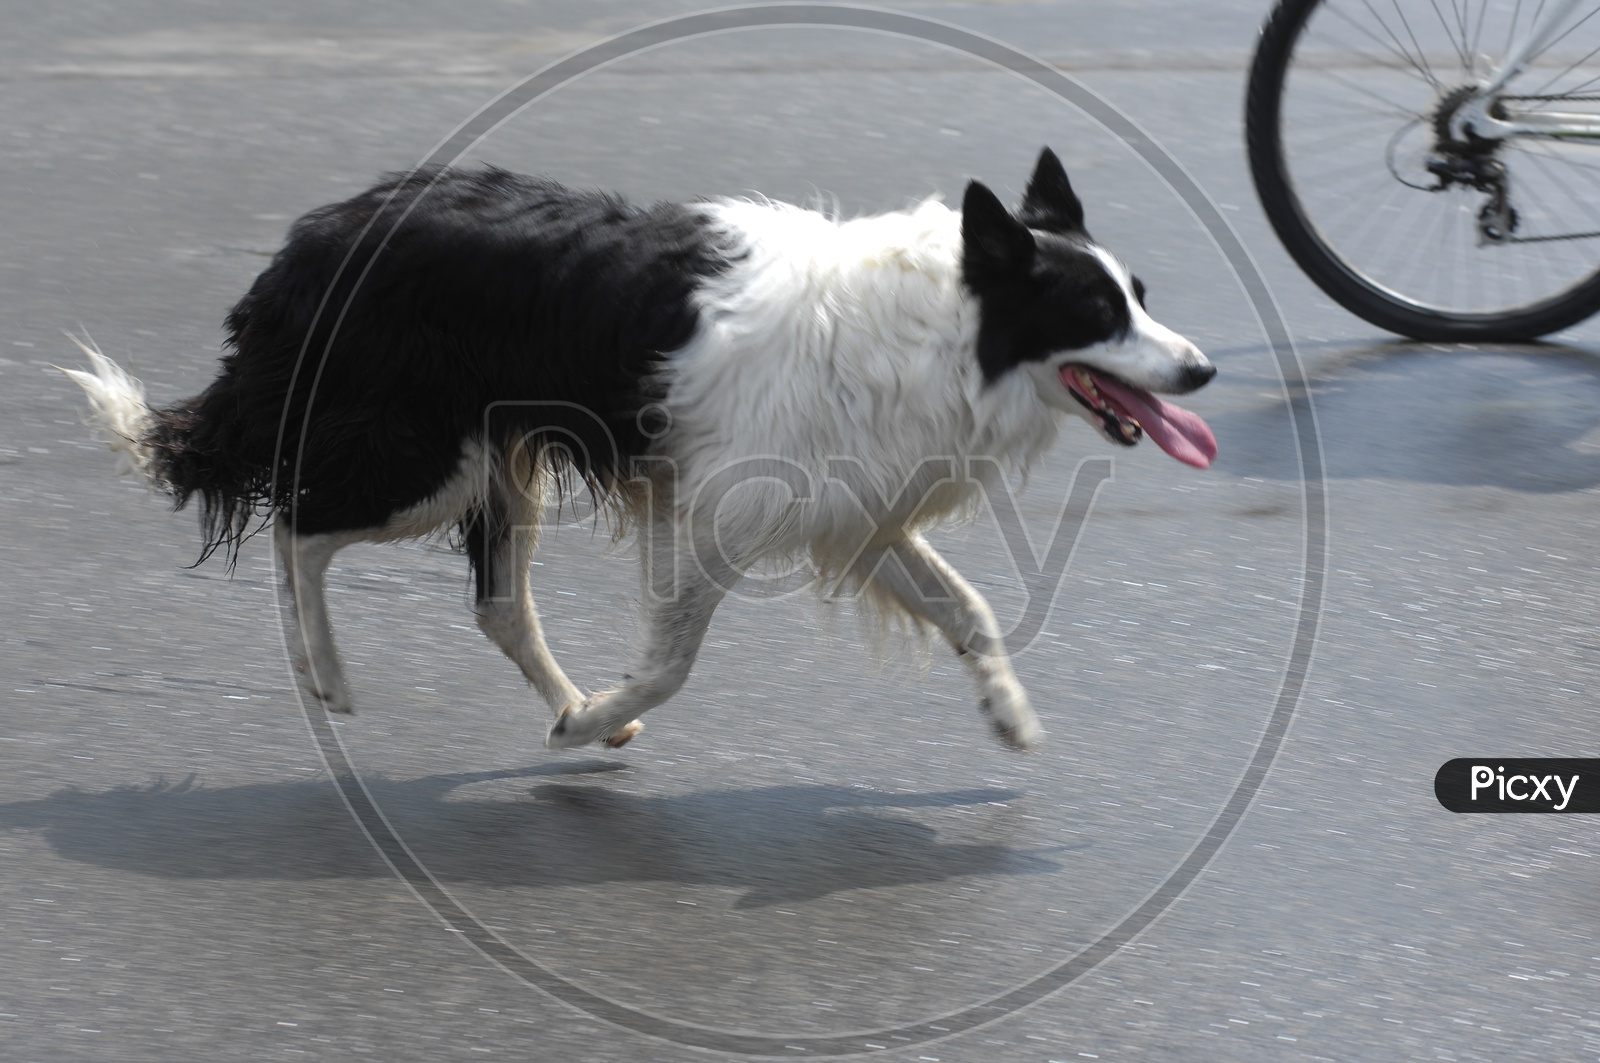 A dog running on the road